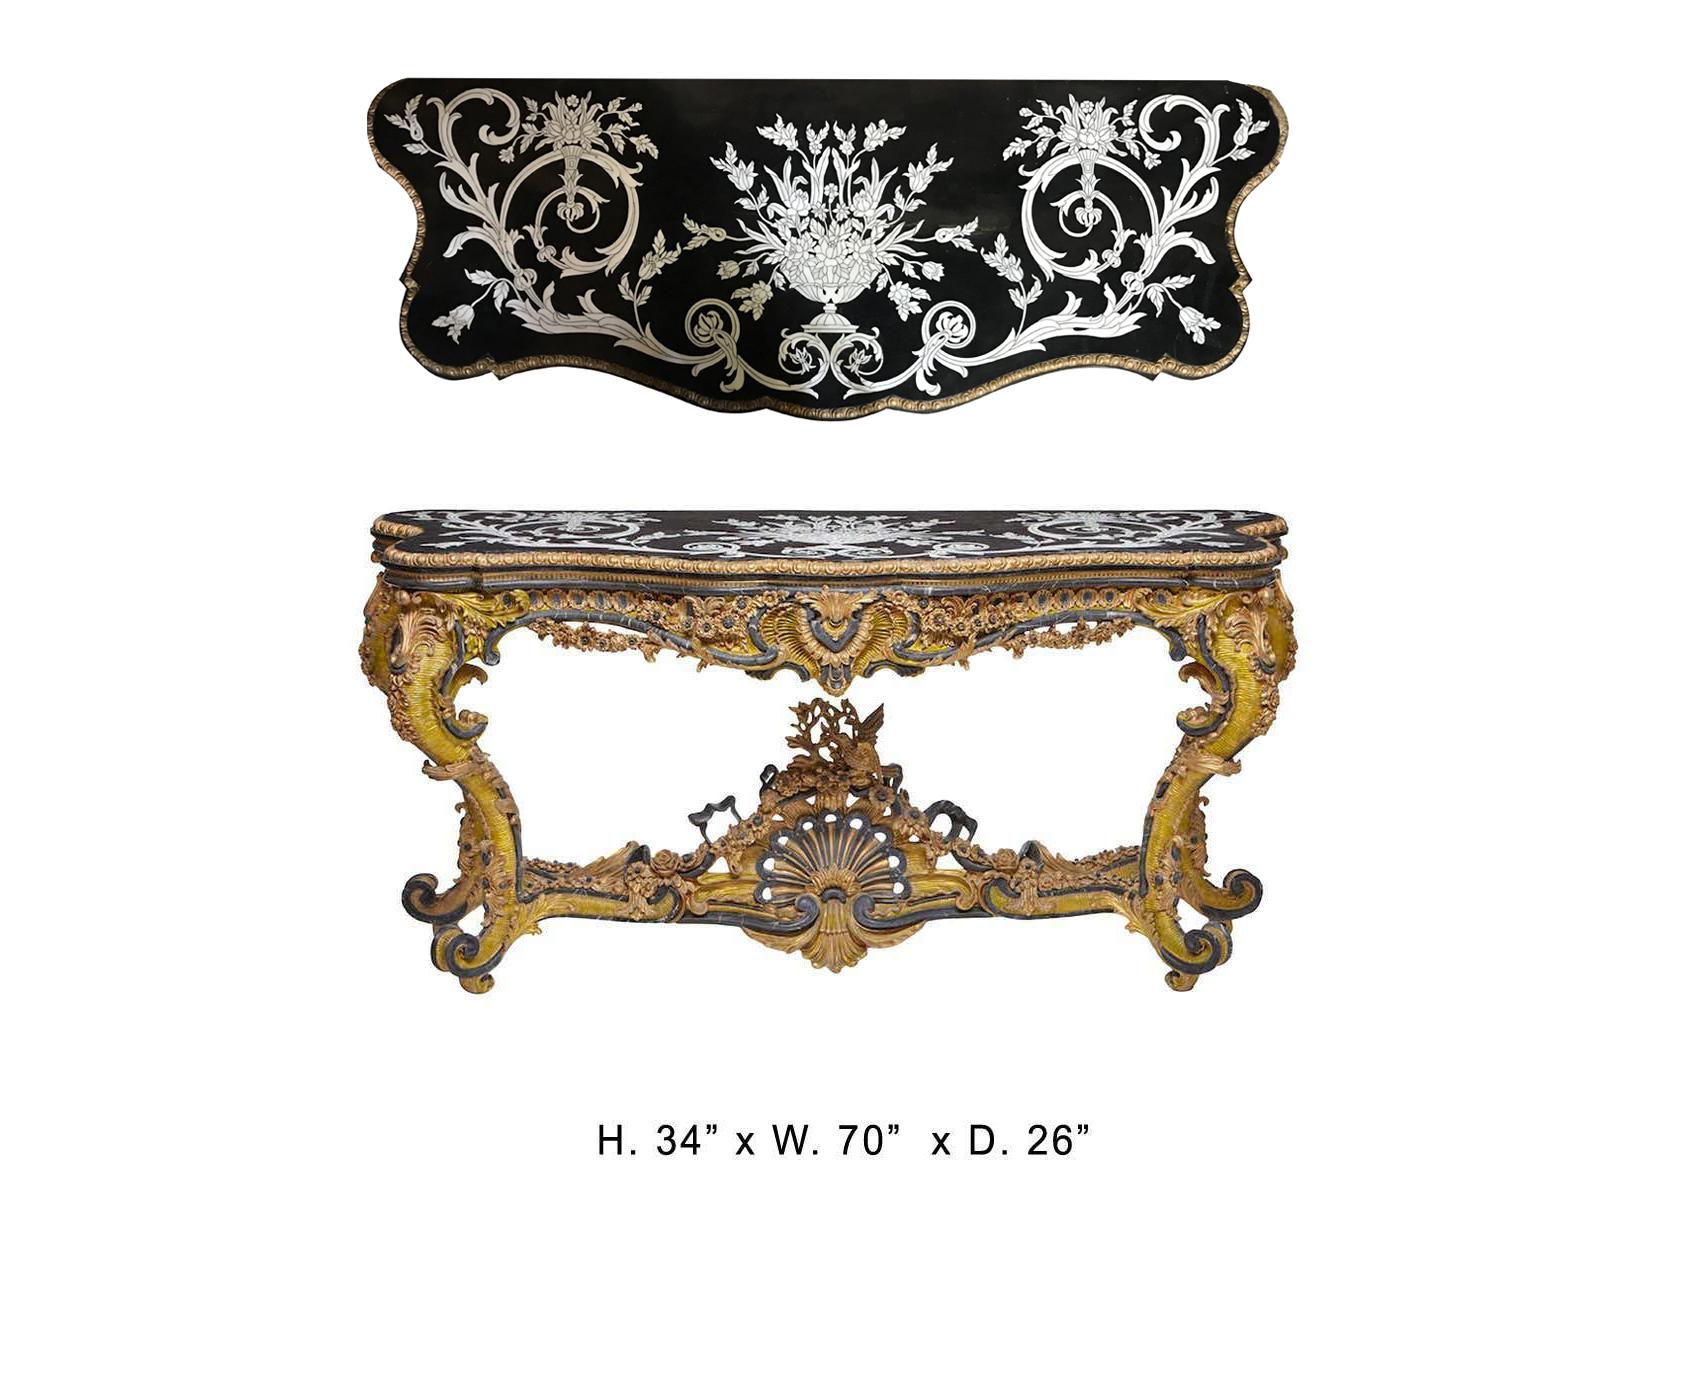 Highly impressive Italian Rococo style carved marble and gilt composition console with inlaid and veneered marble top,
late 20th century.
The black serpentine-fronted marble top is veneered and inlaid in a decorative scrolling foliage motif